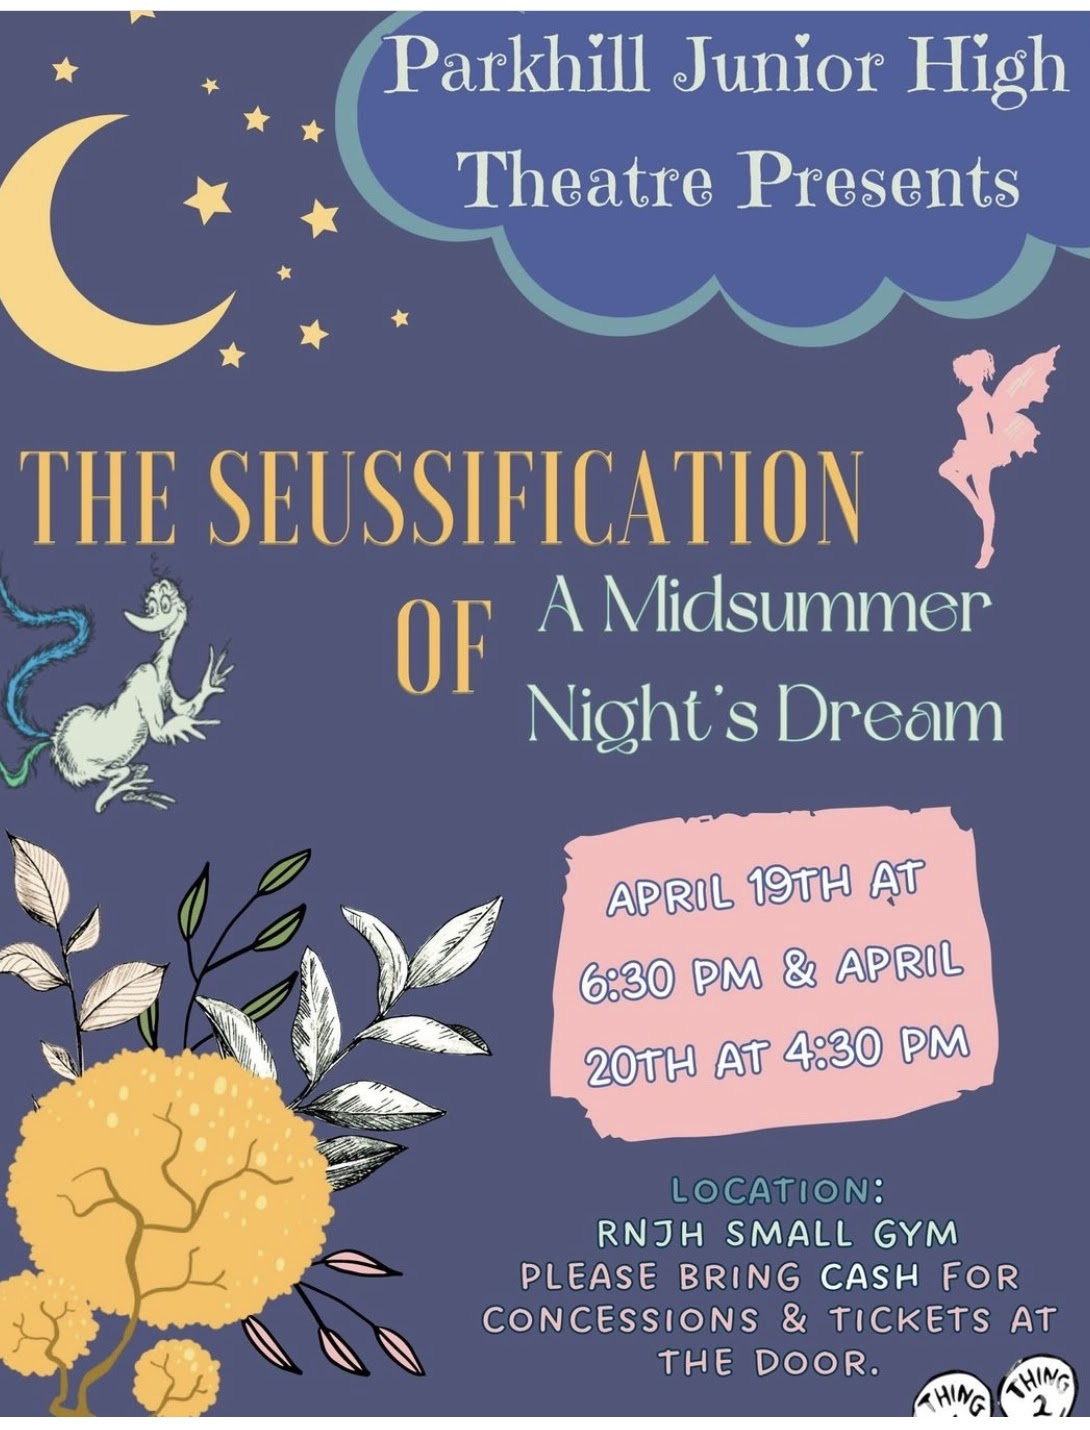 Parkhill Junior High Theatre Presents "The Seussification of A Midsummer Night's Dream" on April 19th at 6:30 PM and April 20th at 4:30 PM. Location is in the RNJH Small Gym. Please bring CASH for concessions and tickets at the door.